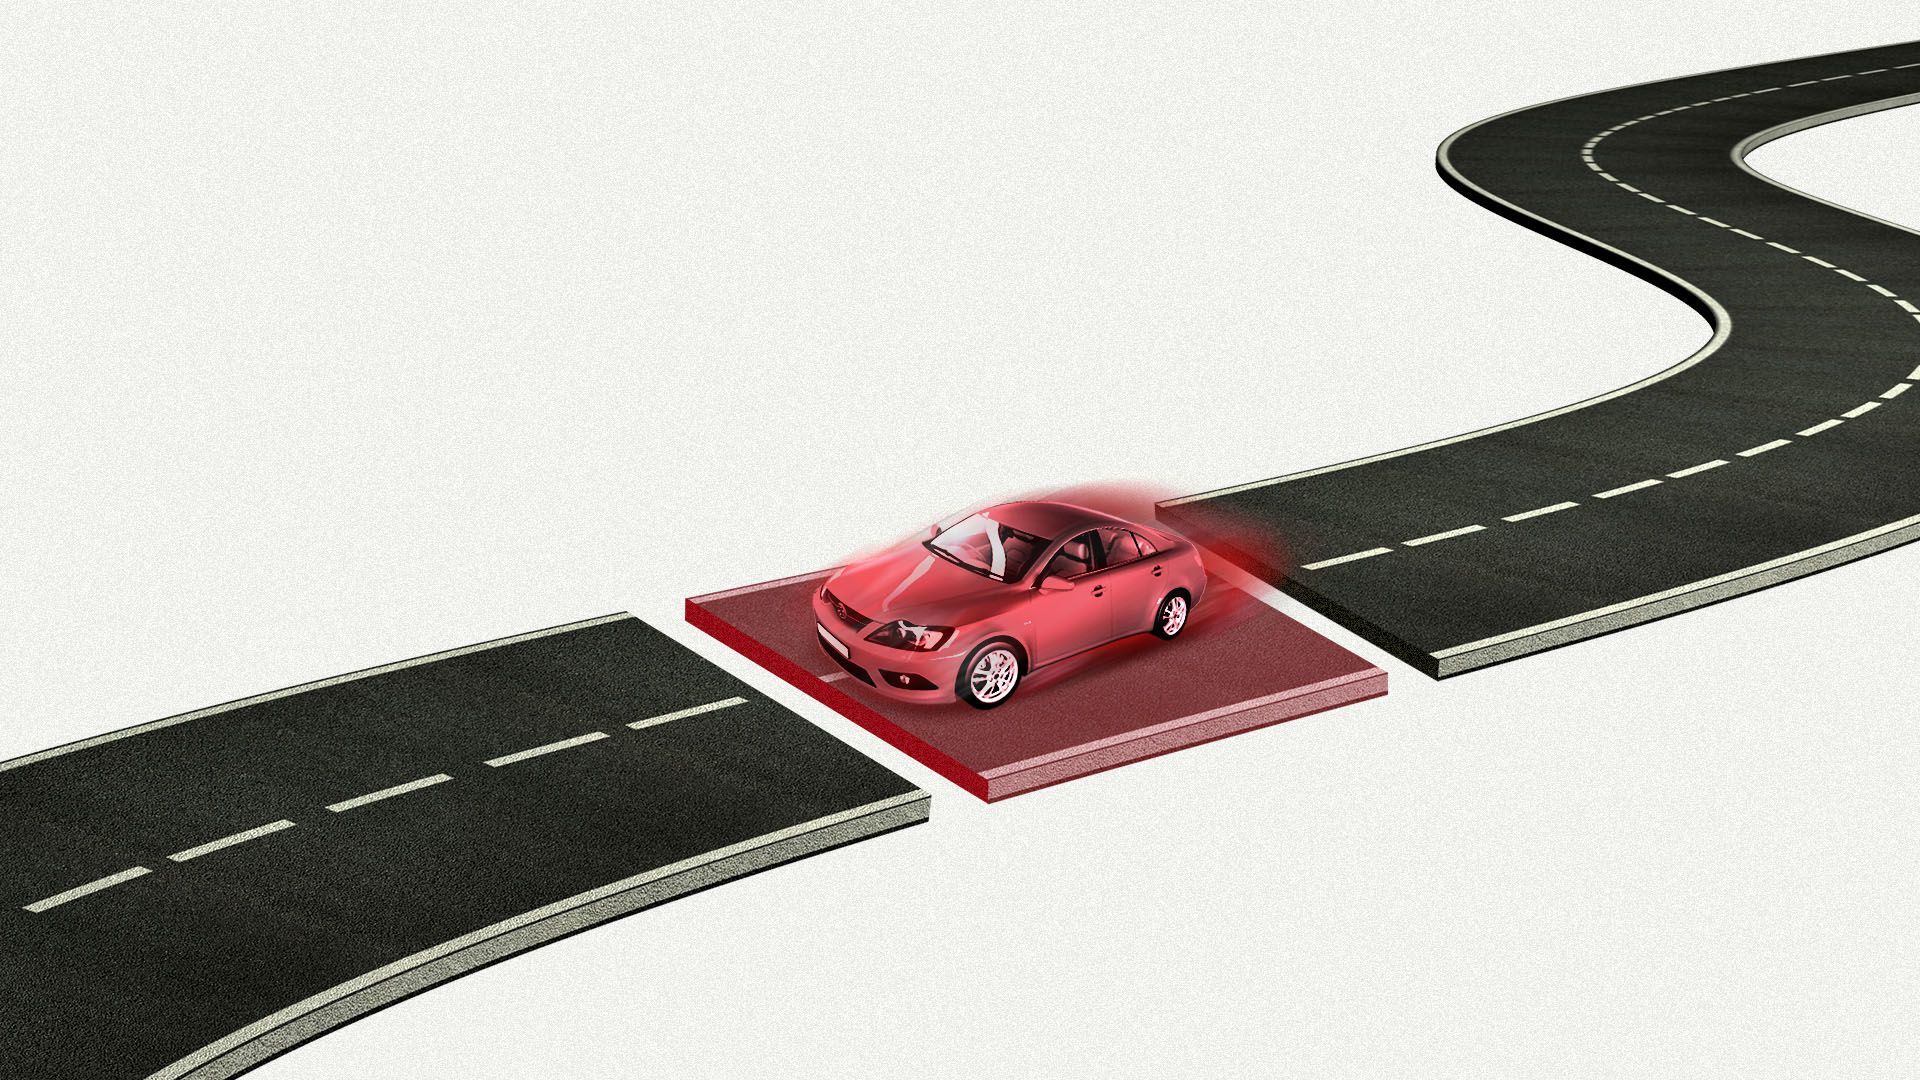 Illustration of a road with a middle section highlight in red, with a red car speeding on it